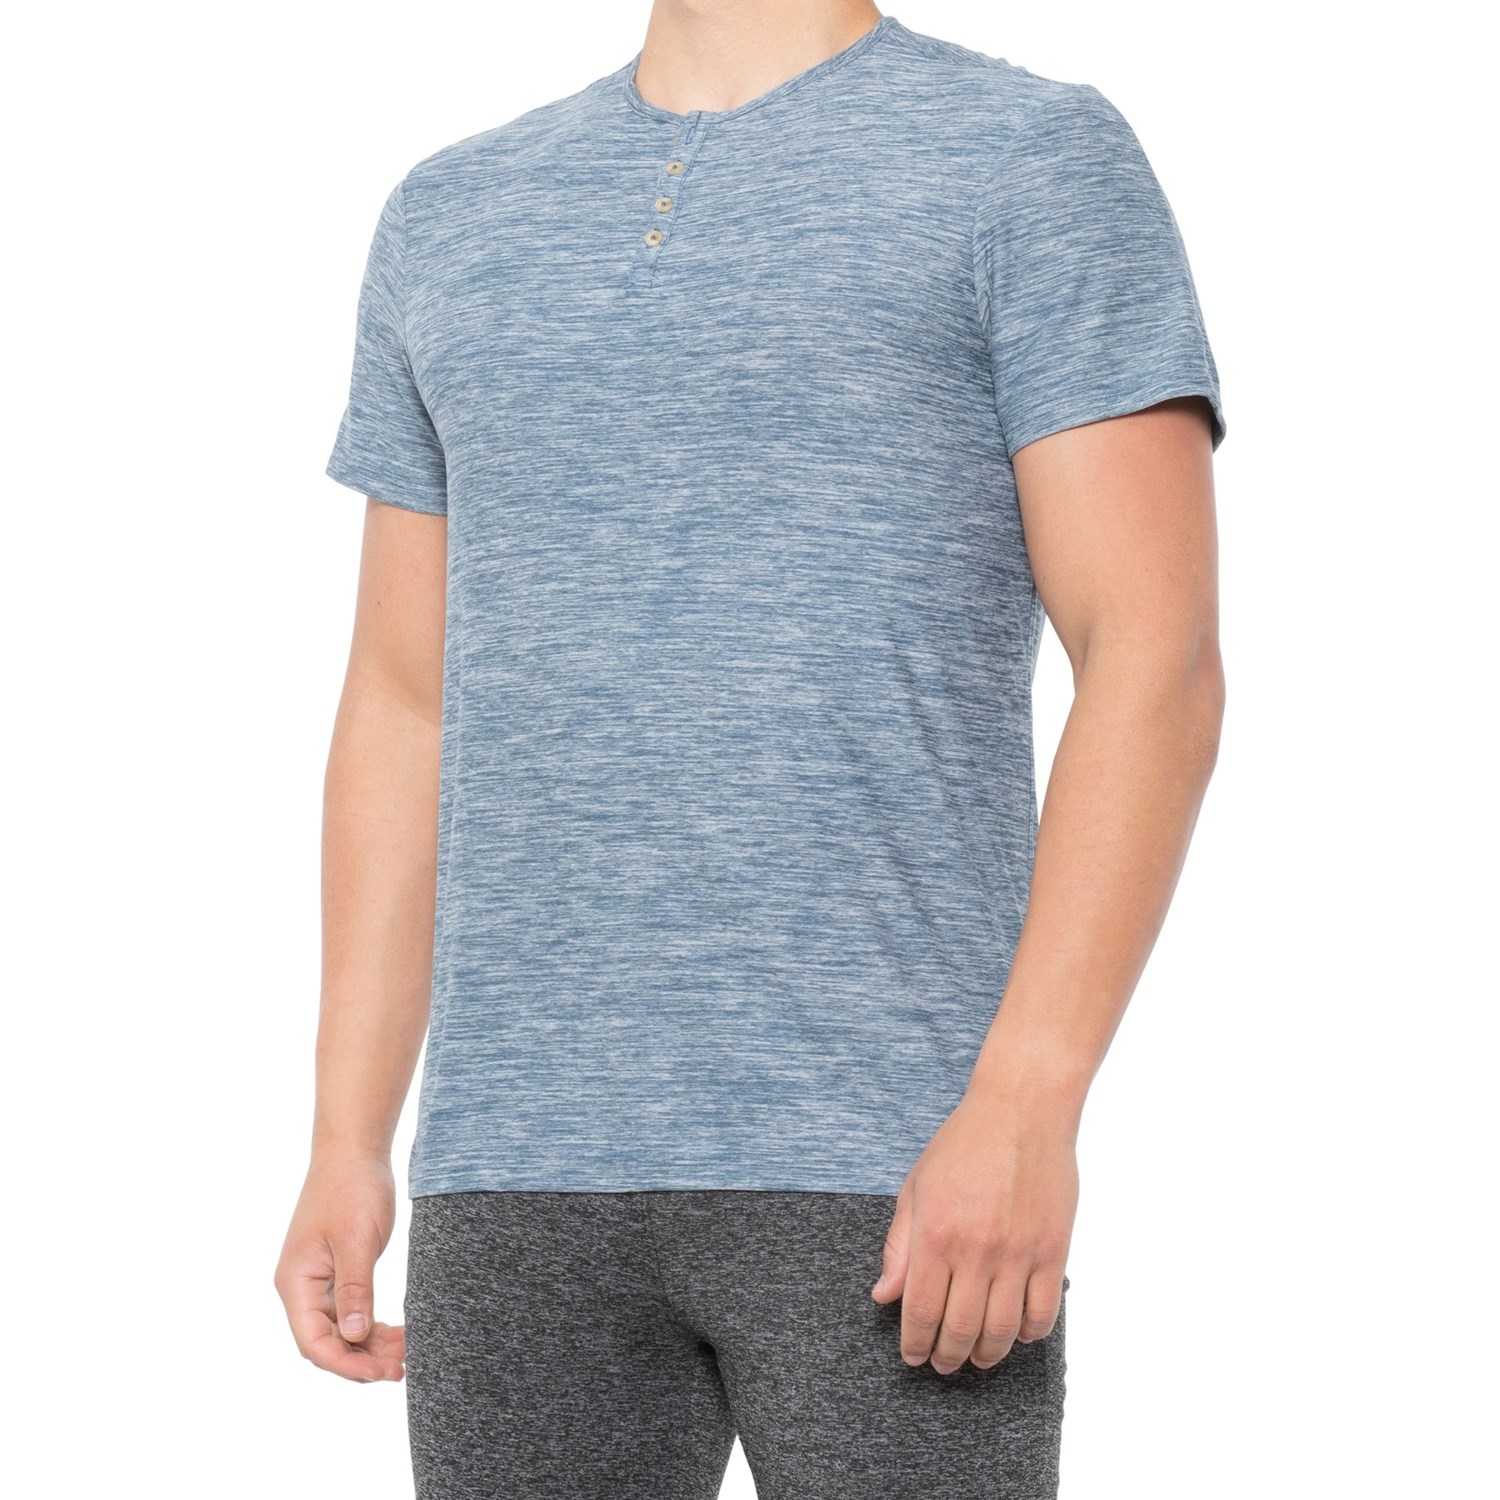 Essex Crossing Supersoft Henley Shirt (For Men) - Save 64%